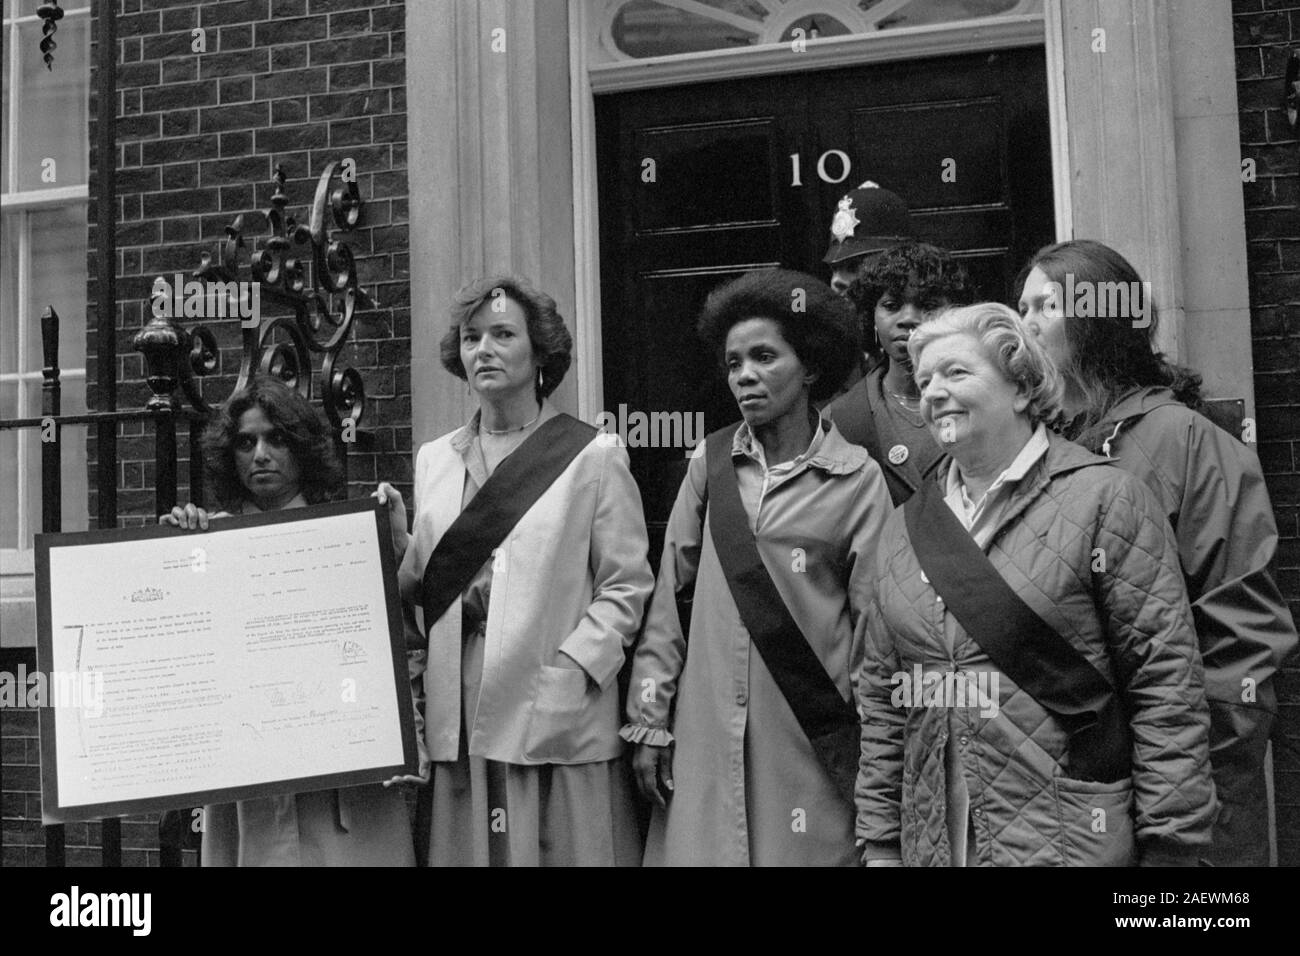 Opposition leader Neil Kinnock's wife Glenys (2nd left) and Mahatma Gandhi's adopted grandchild Shanti Naidoo (l) hold a facsimile of the Trust Deed granted to the people of Kwa Ng ema in 1904 by the Lt-Governor of the Transvaal on behalf of Edward VII. Mrs Kinnock and Shanti are among a group of women who admire the work of Black Sash in South Africa and delivered the document to PM Margaret Thatcher, with a letter asking her to intervene on behalf of the people of Kwa Ngema to ensure they are allowed to remain on their land. Currently about 160 families live there, but they are threatened by Stock Photo